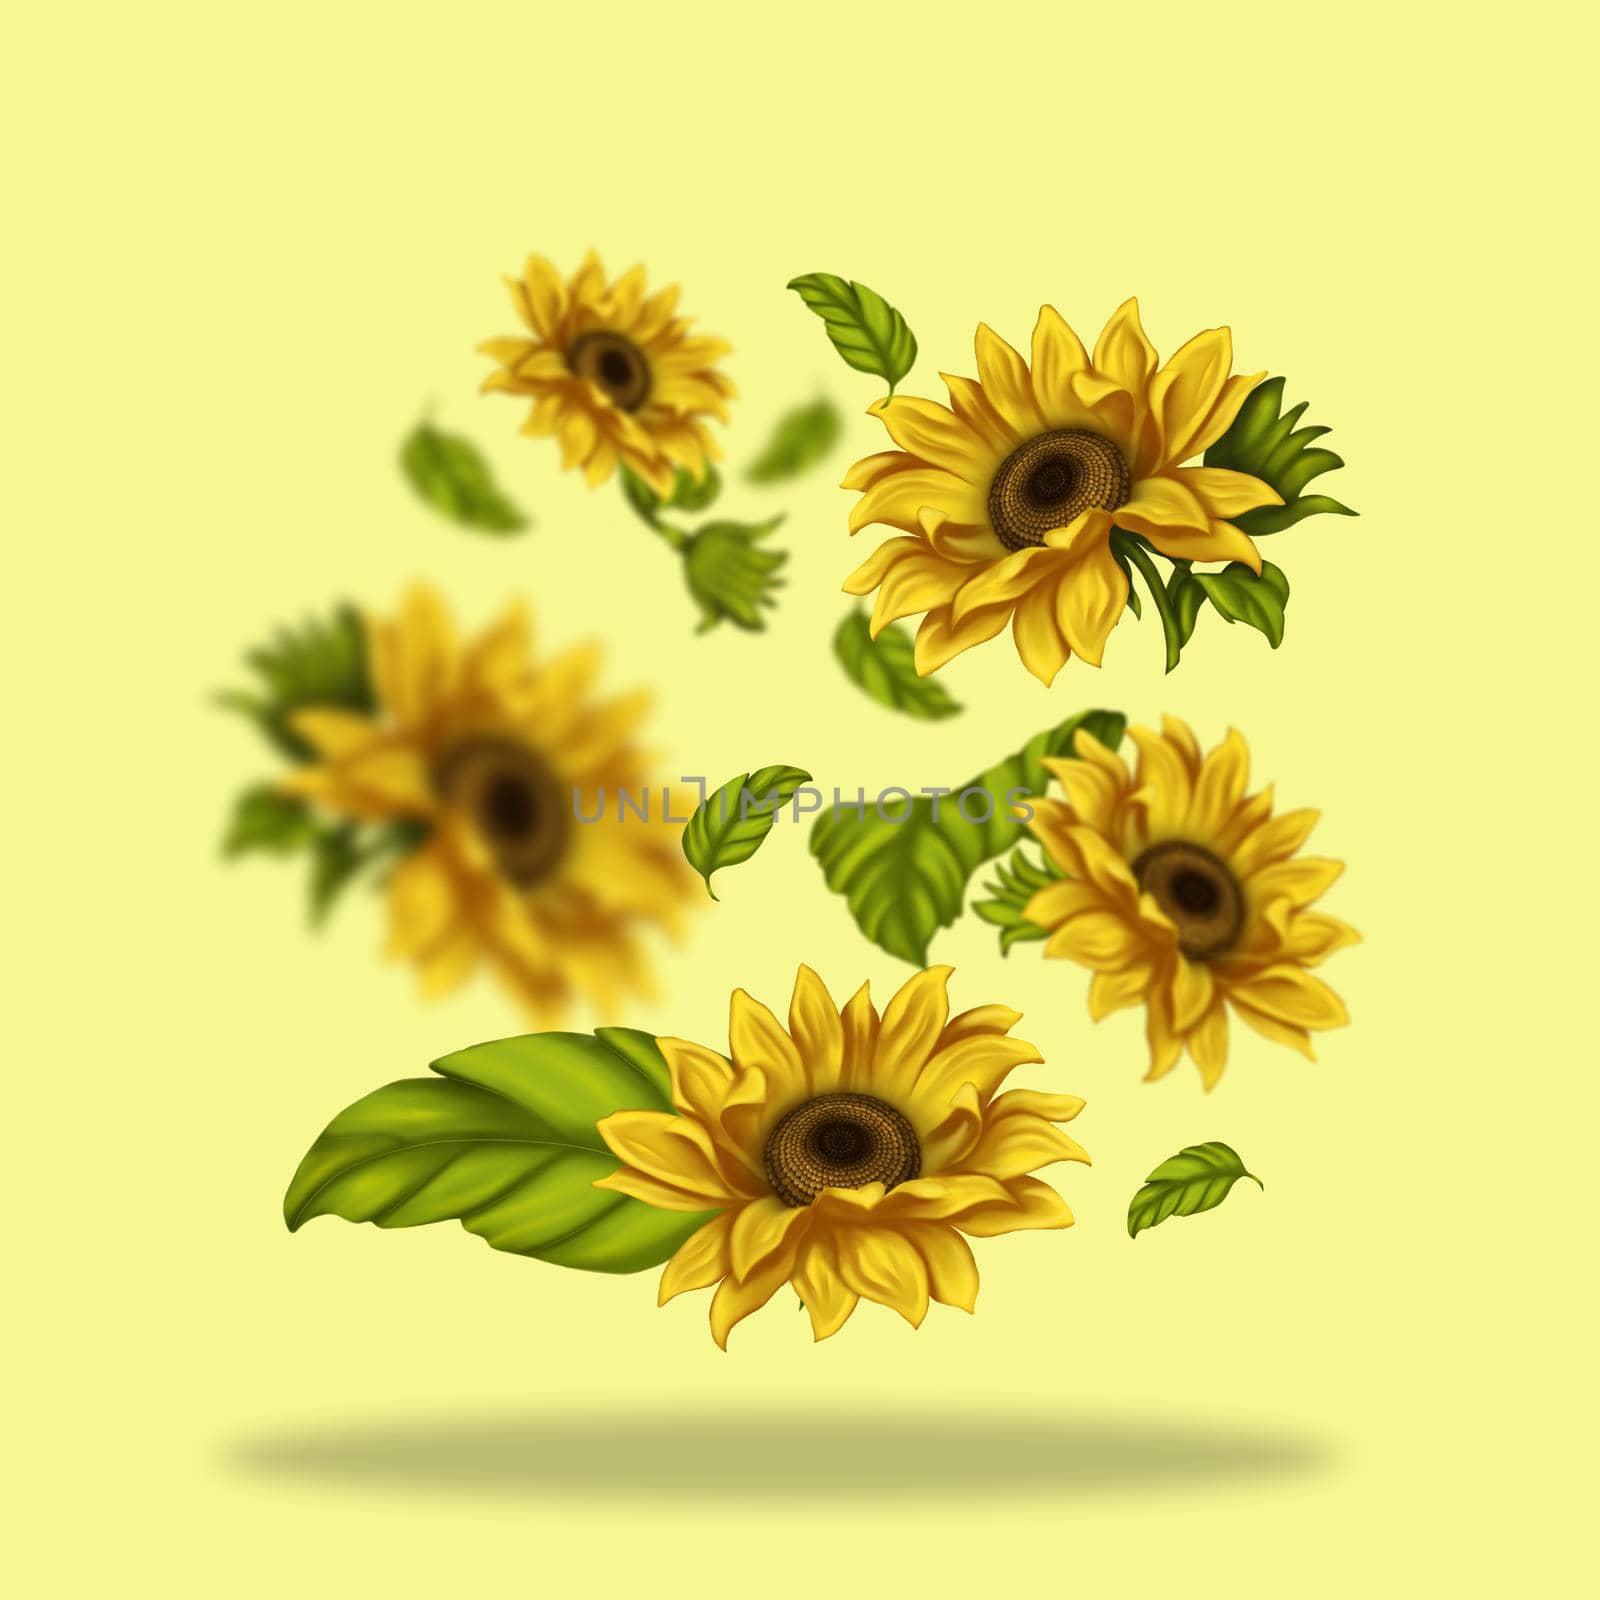 Illustration of sunflower flowers. Flowers freely levitate in space. Bright flowers on a light background.  by Alina_Lebed